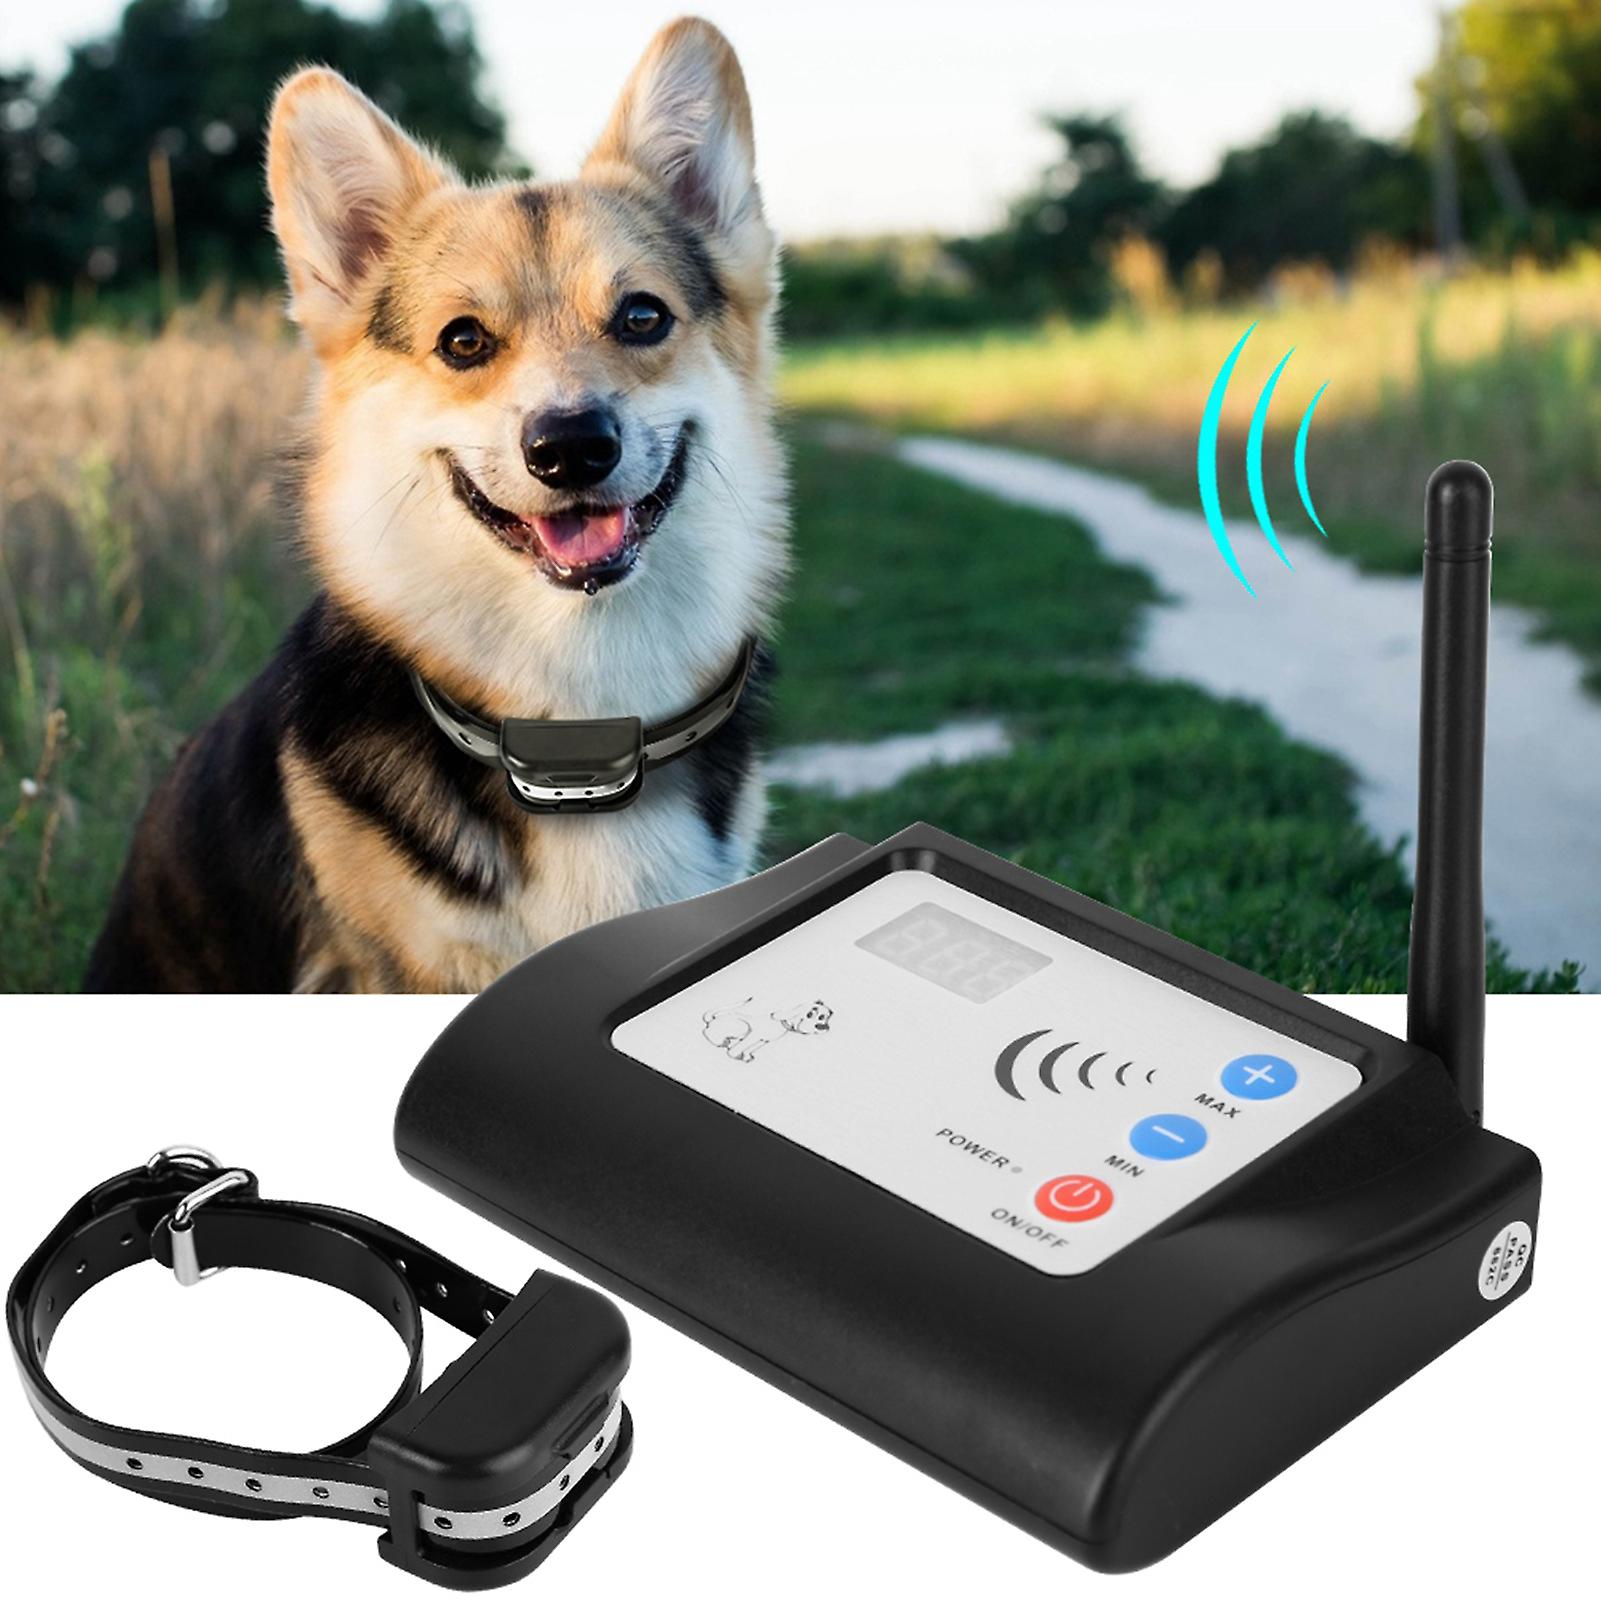 Rechargeable Dog Training Collar Led Wireless Electronic Pet Fence System (eu Plug 100and#8209;240v)